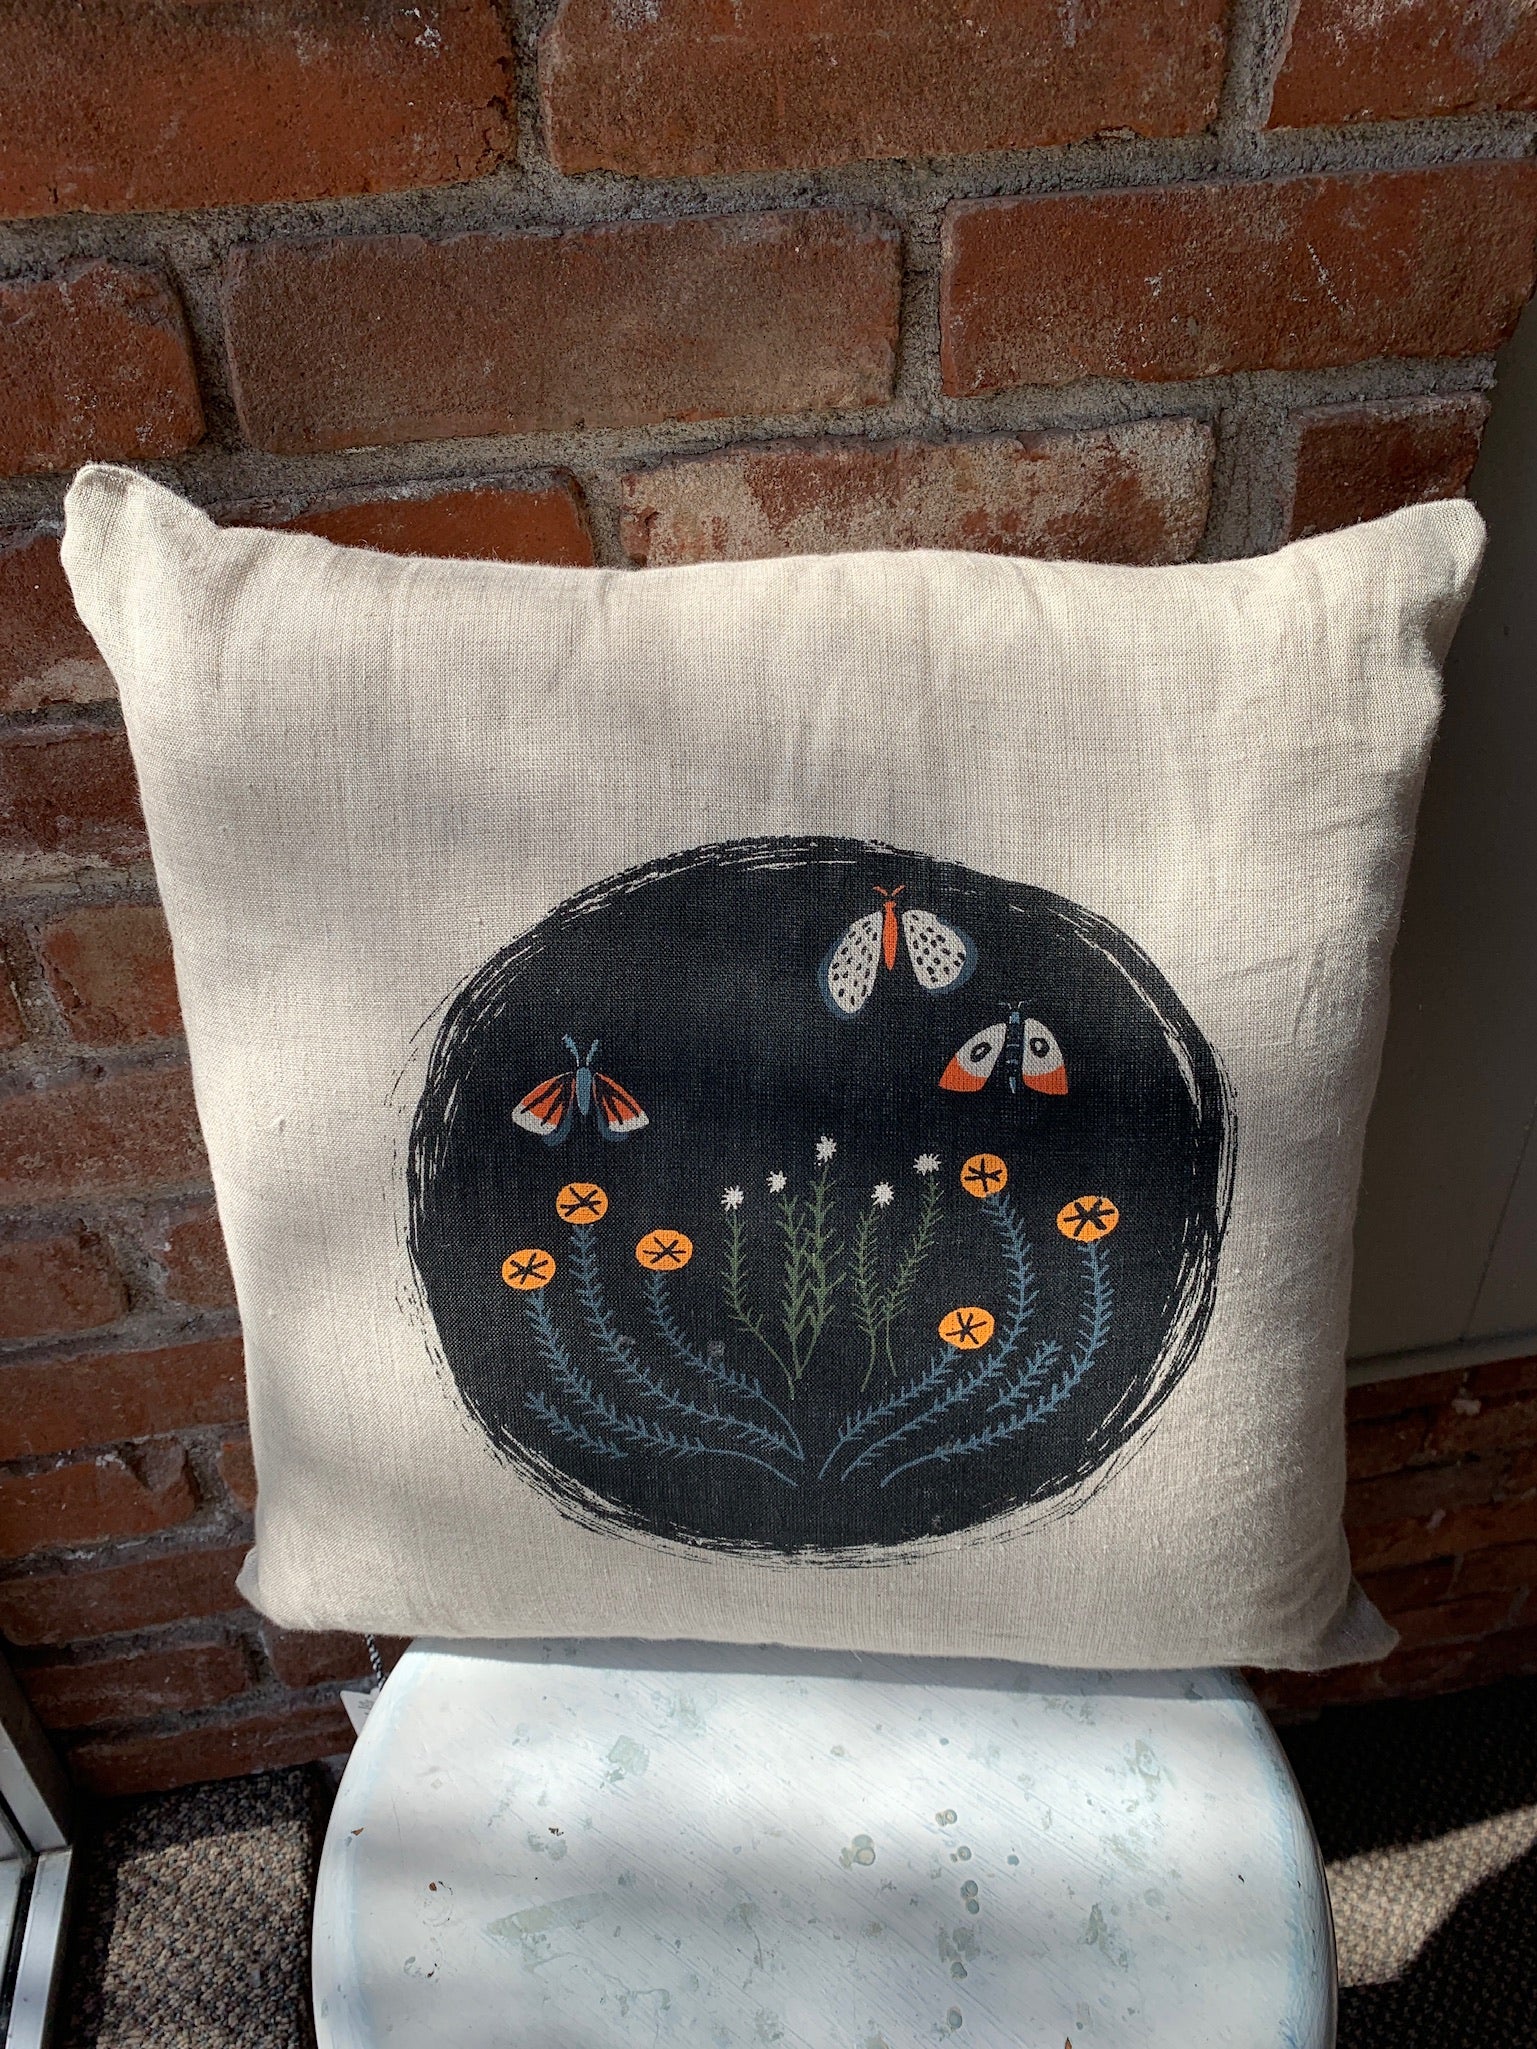 Black circle with moth and flower print. Colors include black, orange, and navy blue.